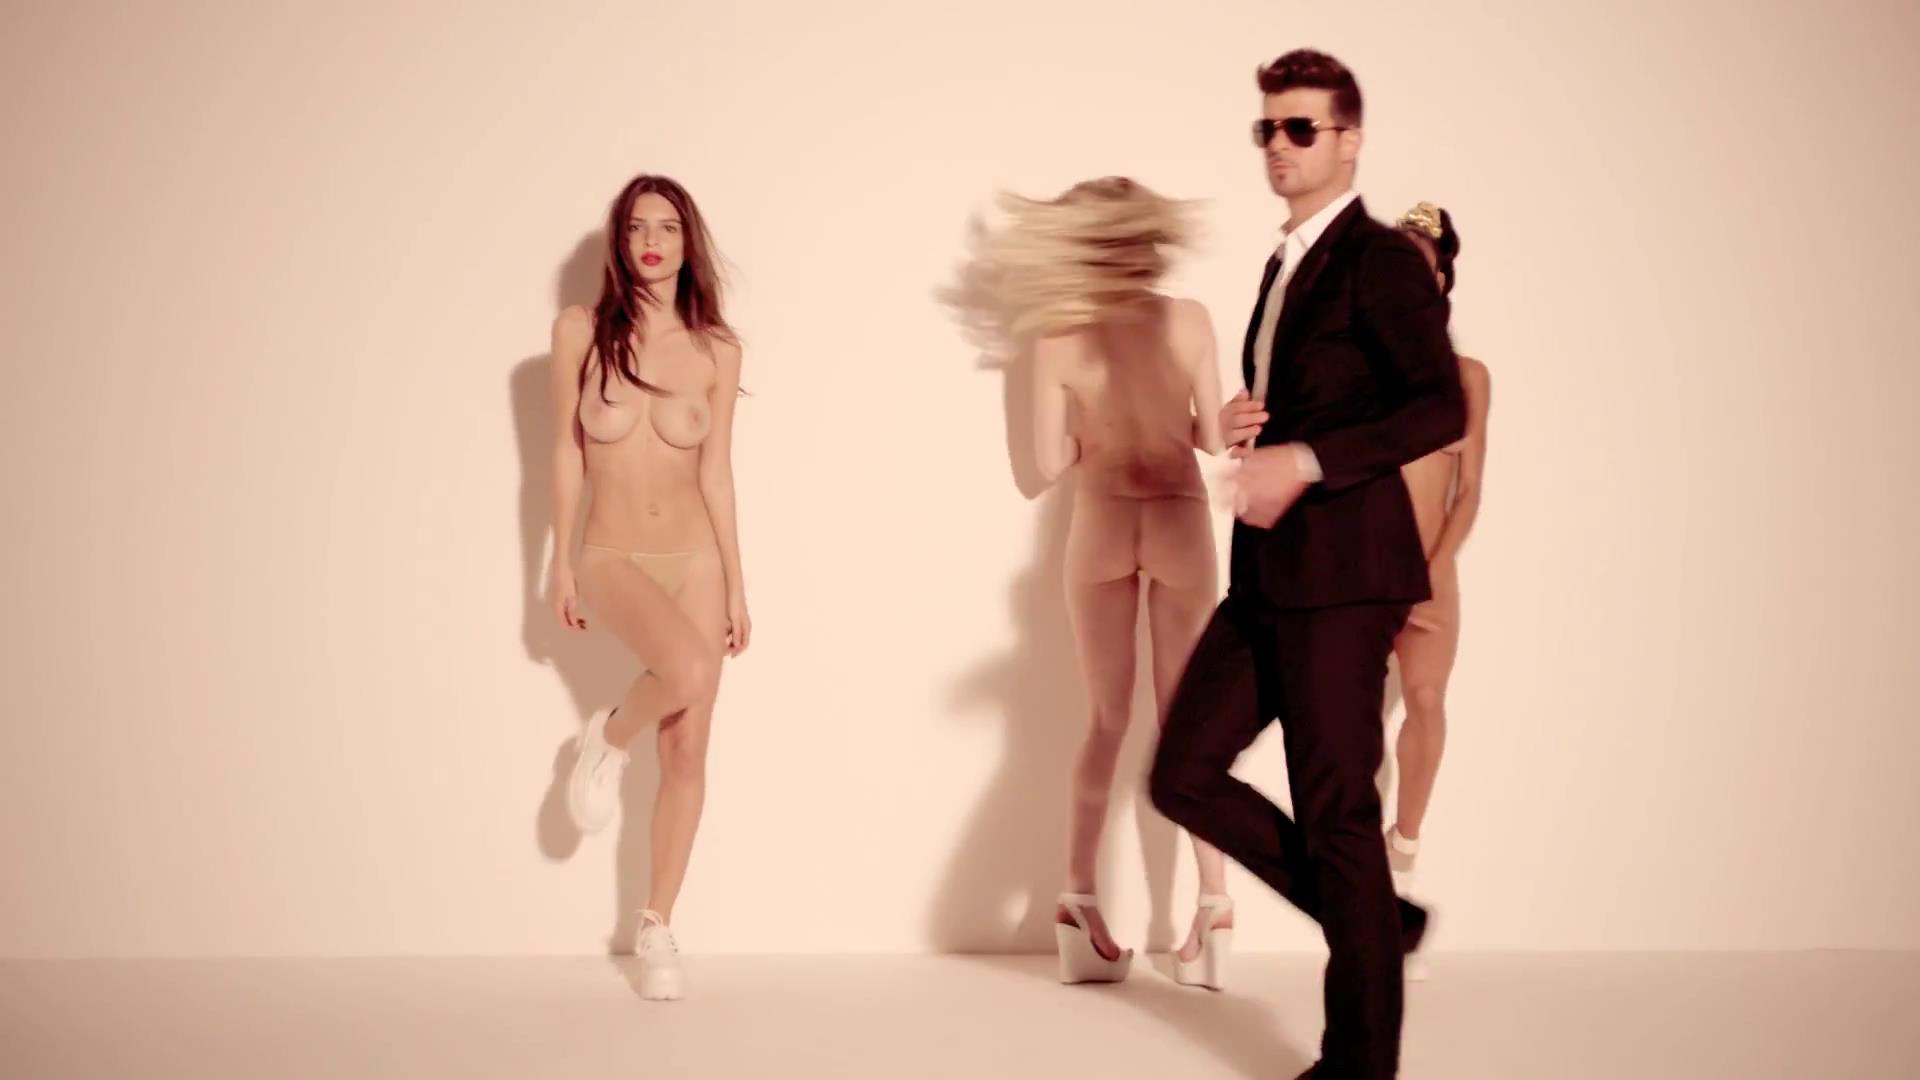 Robin Thicke Blurred Lines Nude